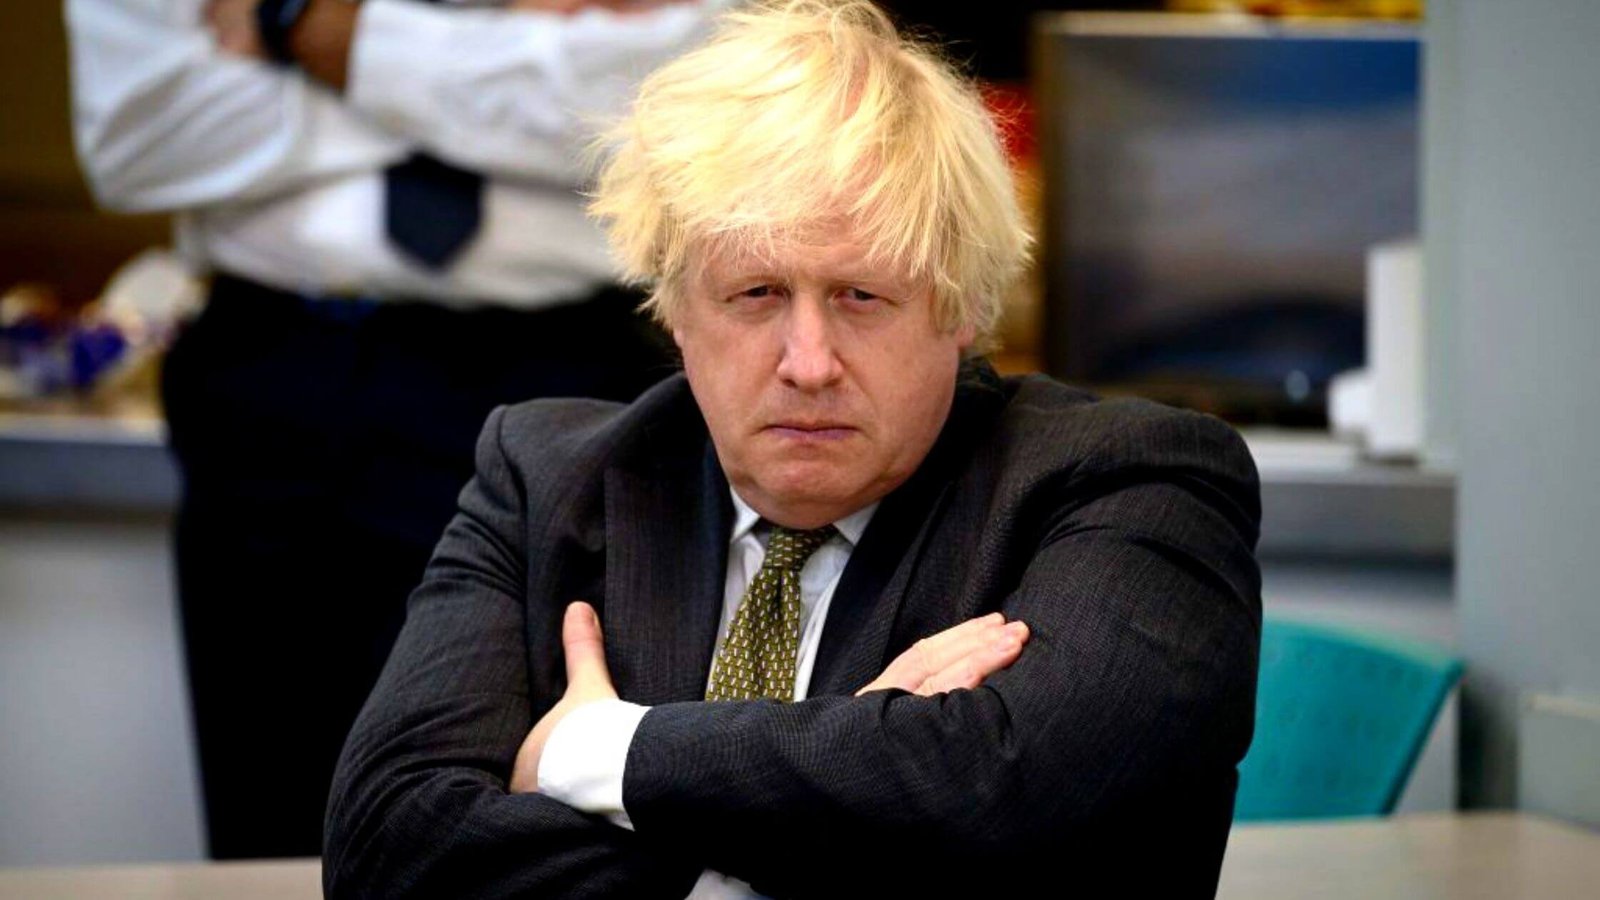 Chief Of The Justice Committee Submits Letter Of No Confidence In Boris Johnson